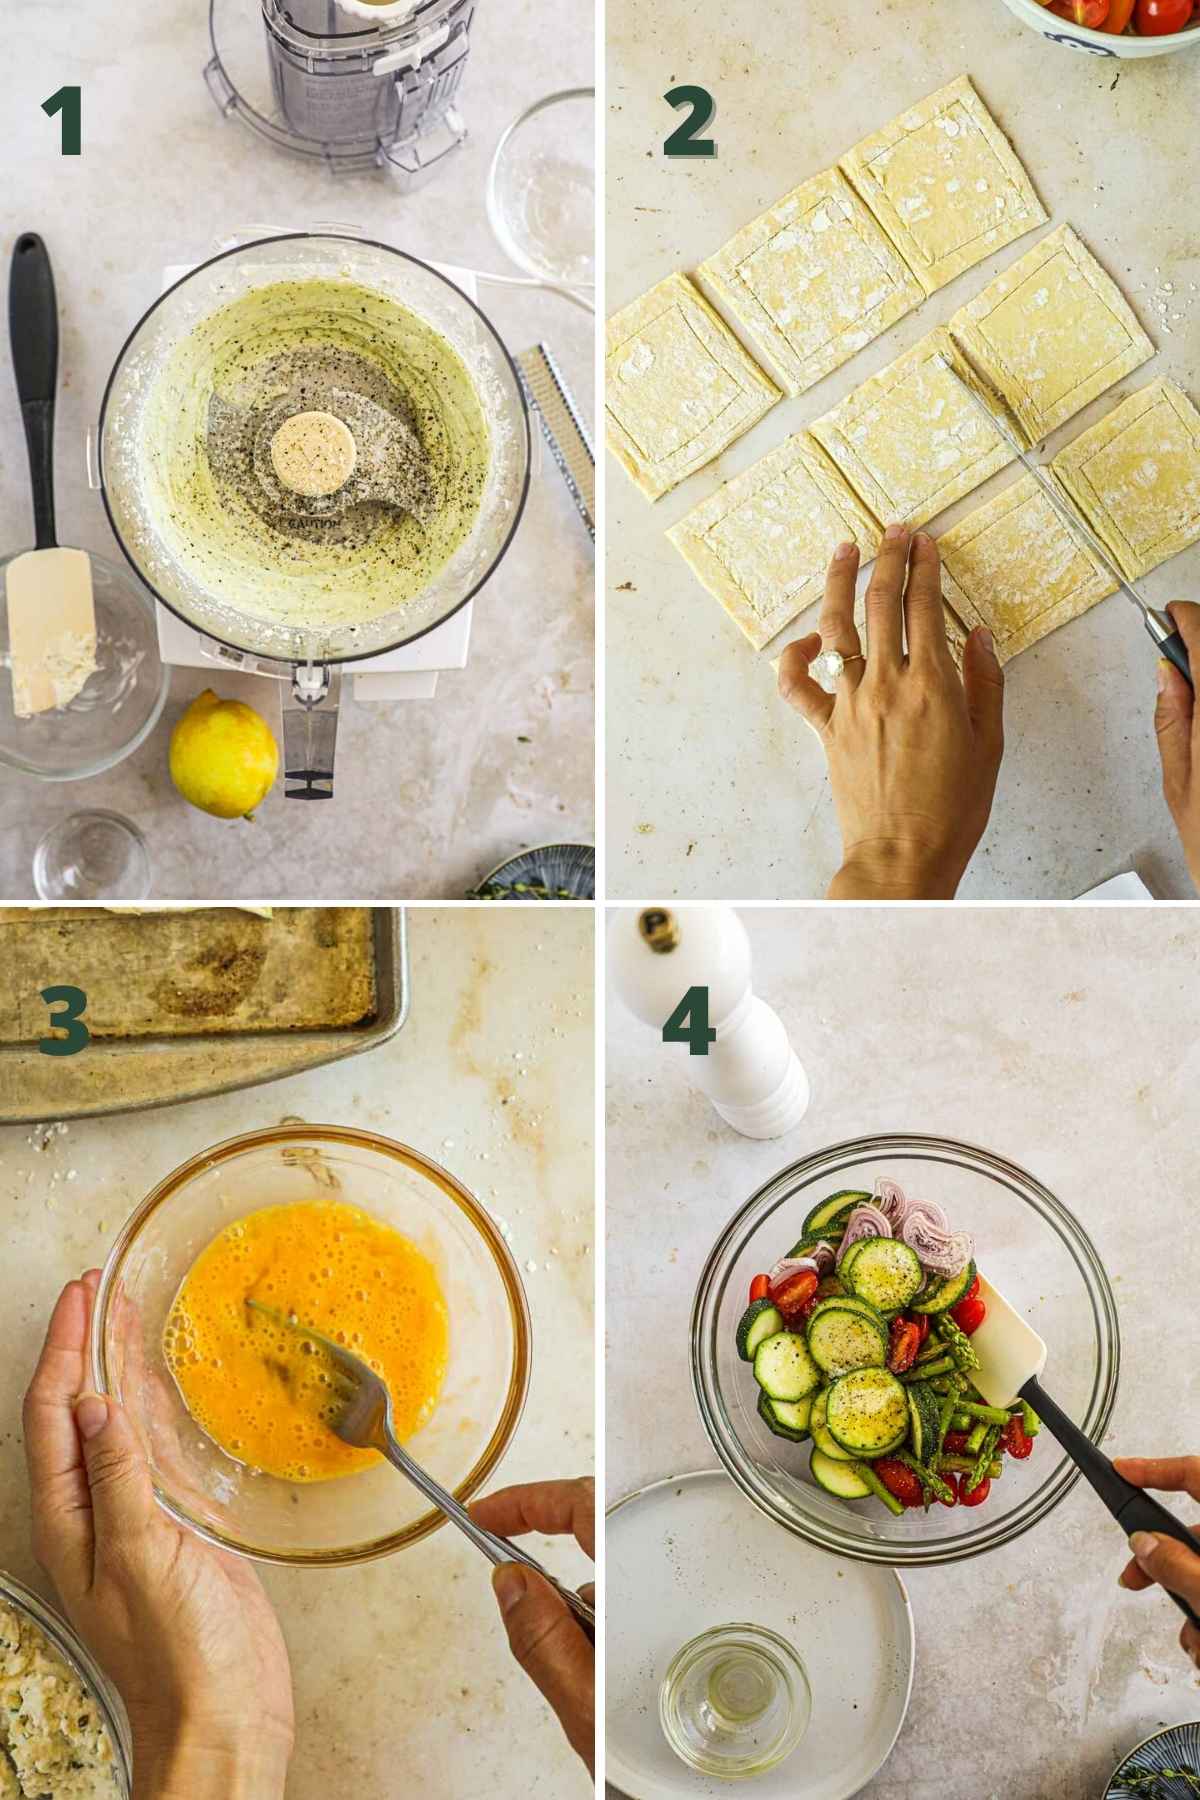 Steps to make puff pastry vegetable tarts, including whipping the goat cheese and herbs in a food processor, cutting the puff pastry, making the egg wash, and mixing the seasoned vegetables.